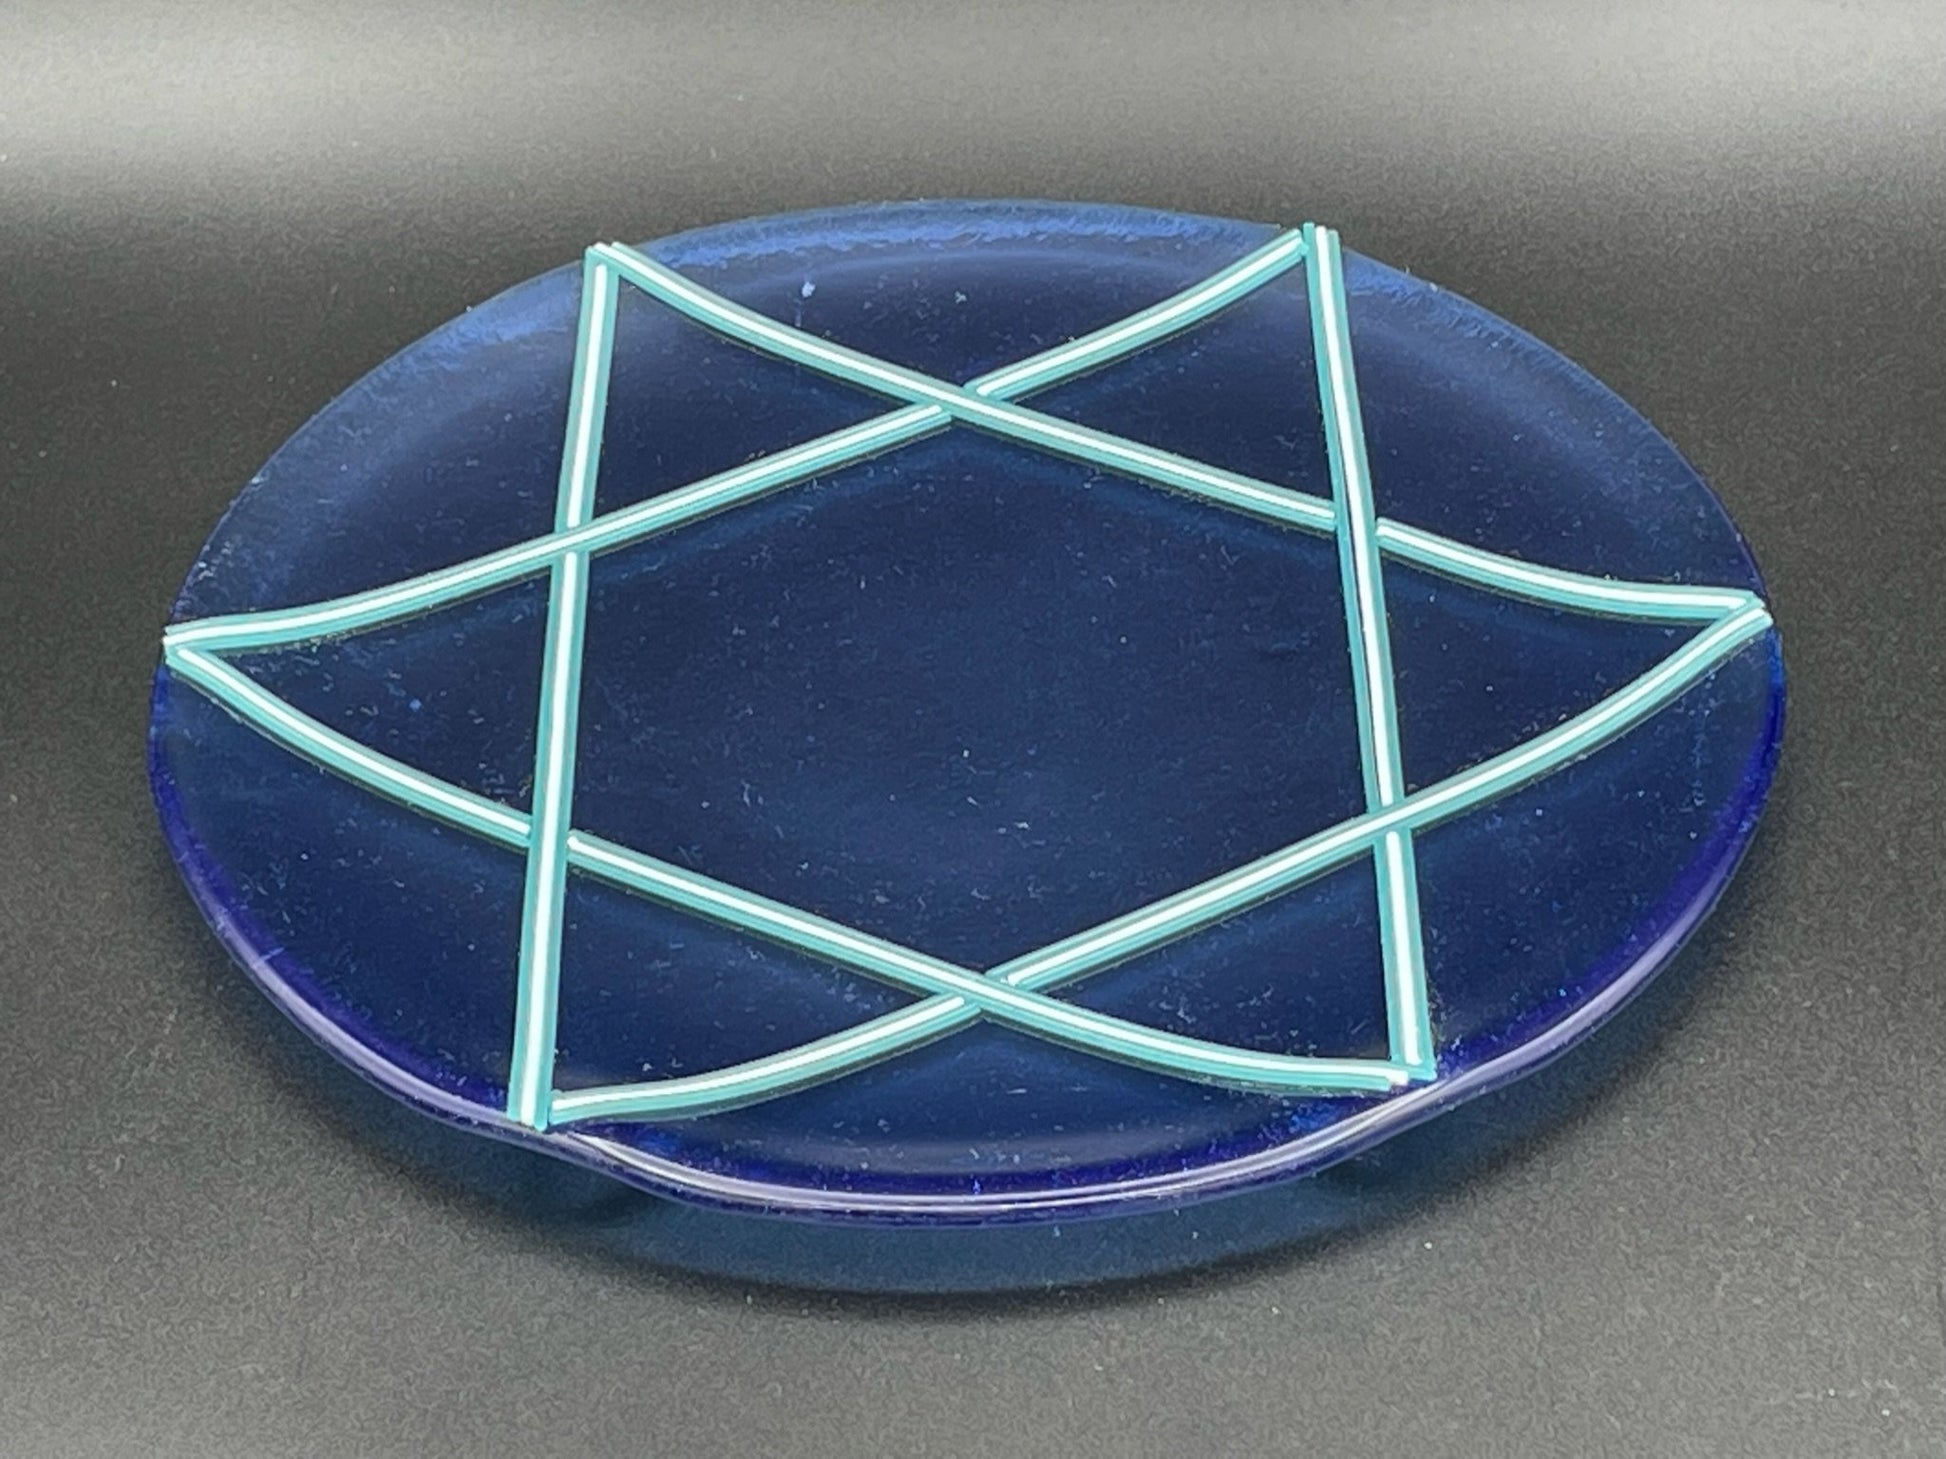 Star of David platter is perfect for any occasion like Shabbat challah, Hanukkah cookies, or Passover matzo. The platter is transparent blue with turquoise and white star.  Dimensions are approximately 10” (inches).